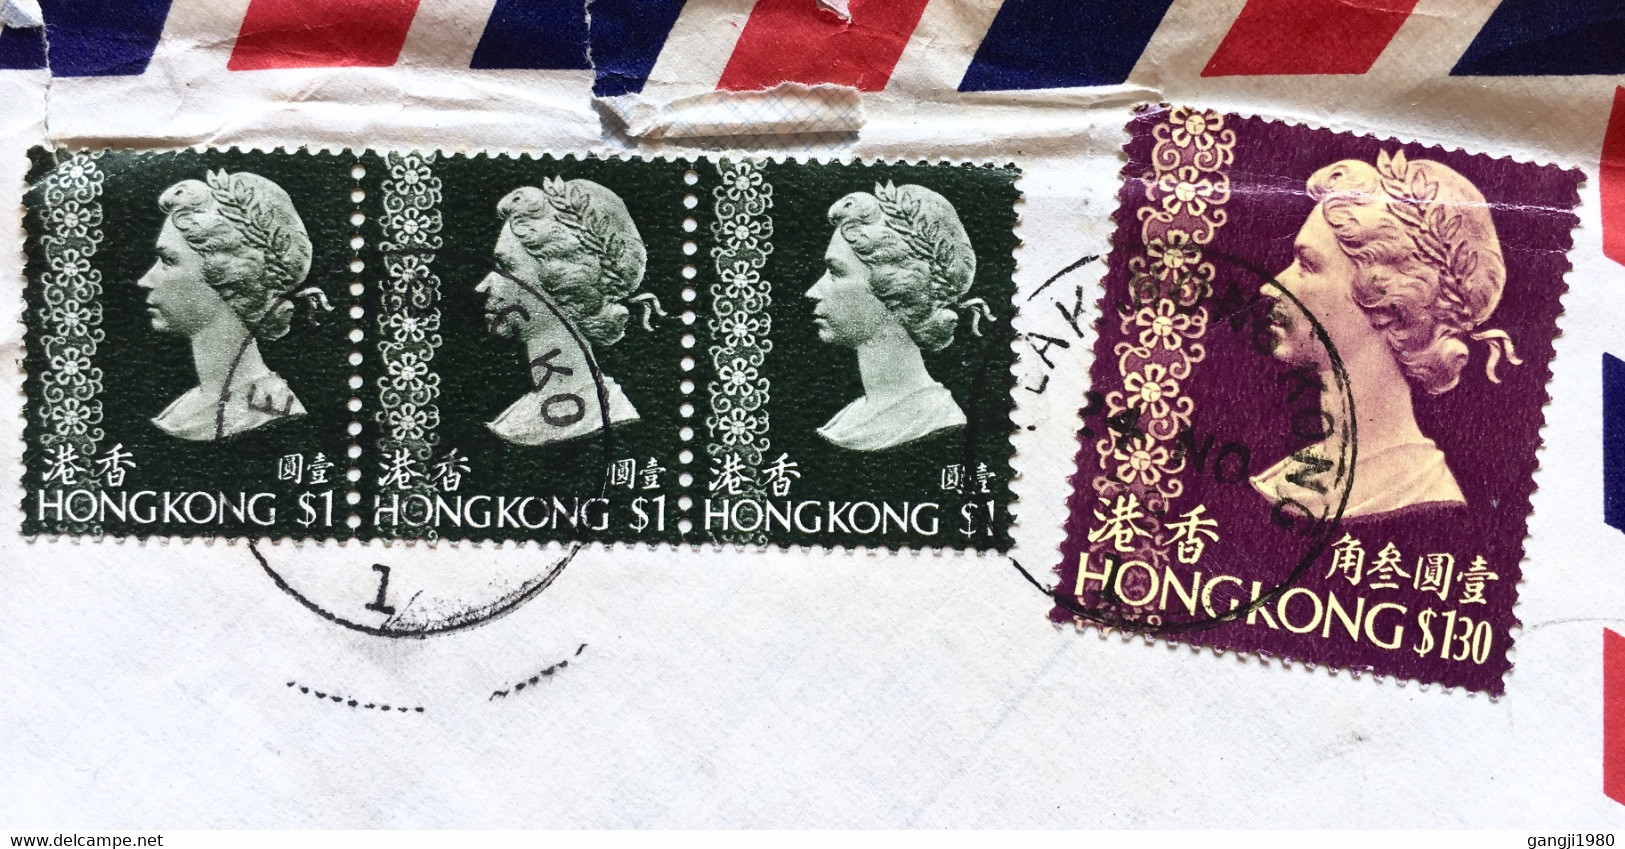 HONG KONG TO ENGLAND 1971, USED COVER, QUEEN 1$ 3 STAMPS, 1.30$ ONE STAMP, VIGNETTE EXPRESS LABEL, LAKE HONG KONG CANCEL - Covers & Documents